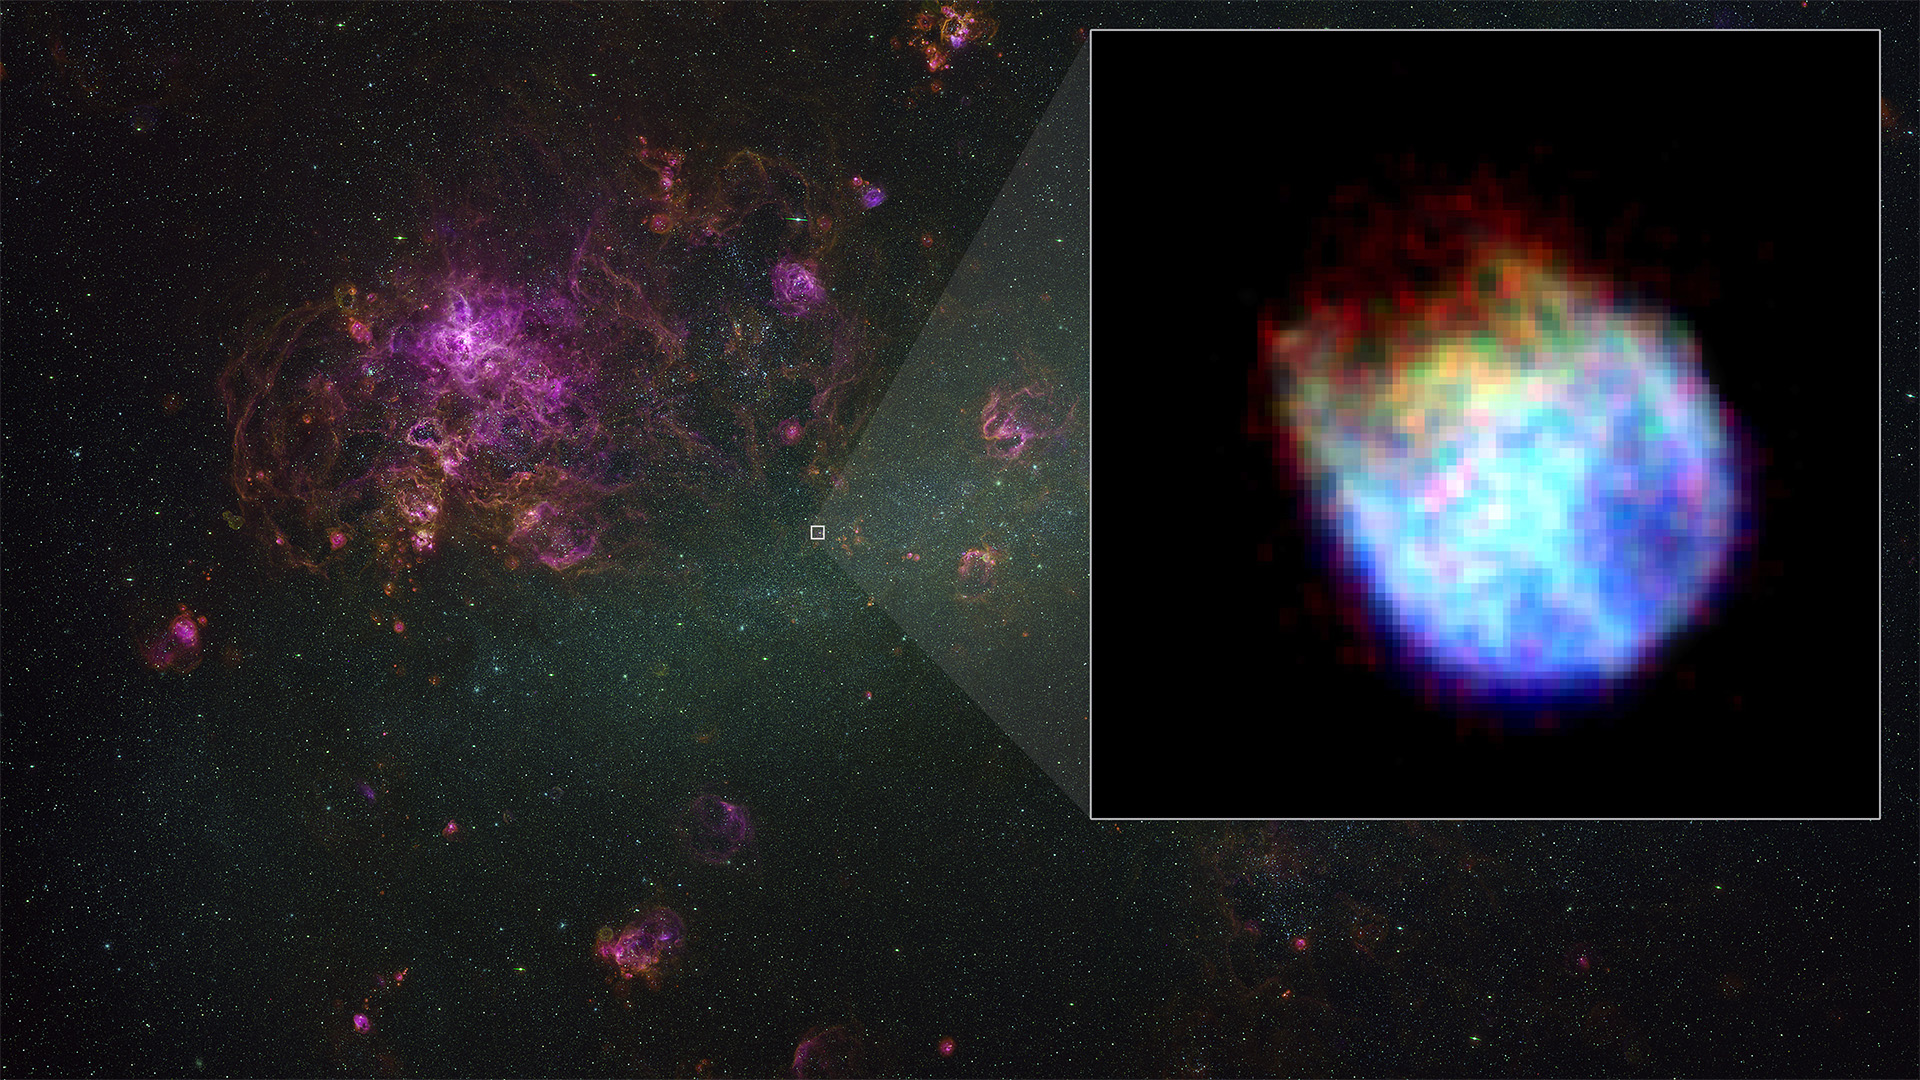 This graphic shows the Large Magellanic Cloud with an X-ray image of supernova remnant N132D as an inset.